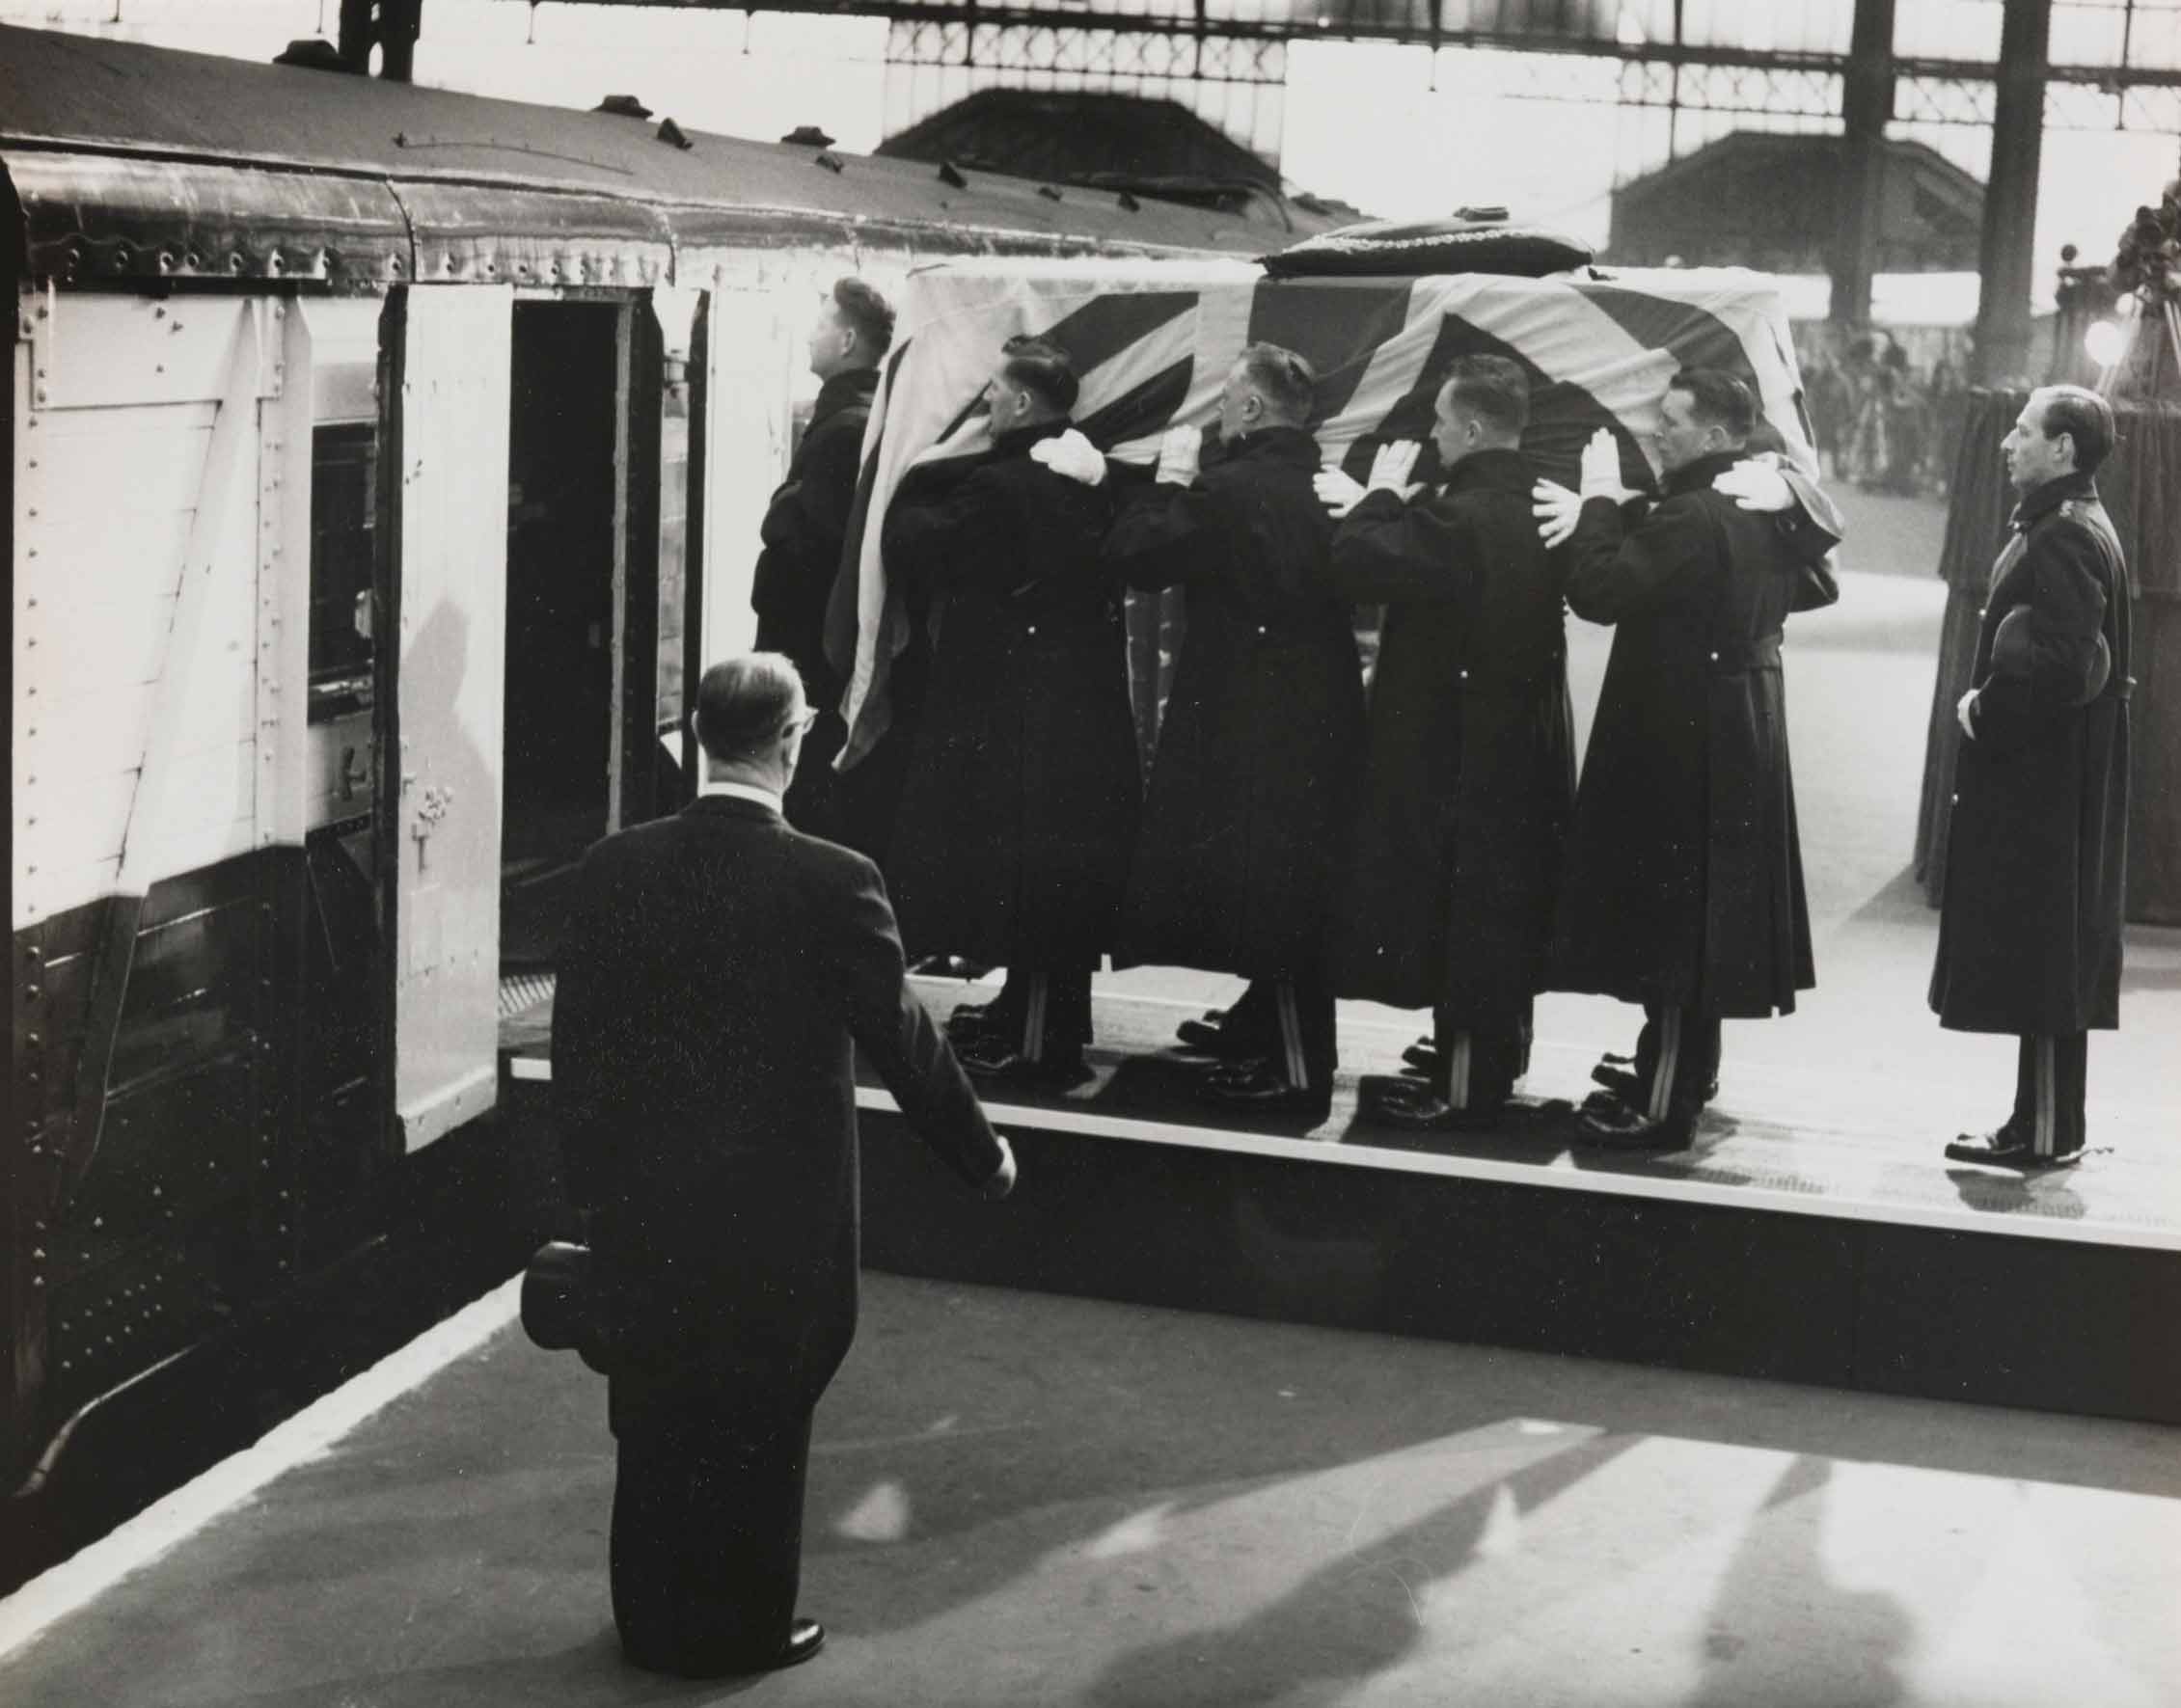 Archive image of the state funeral of Sir Winston Churchill. Image credit: Daily Newspaper archives.